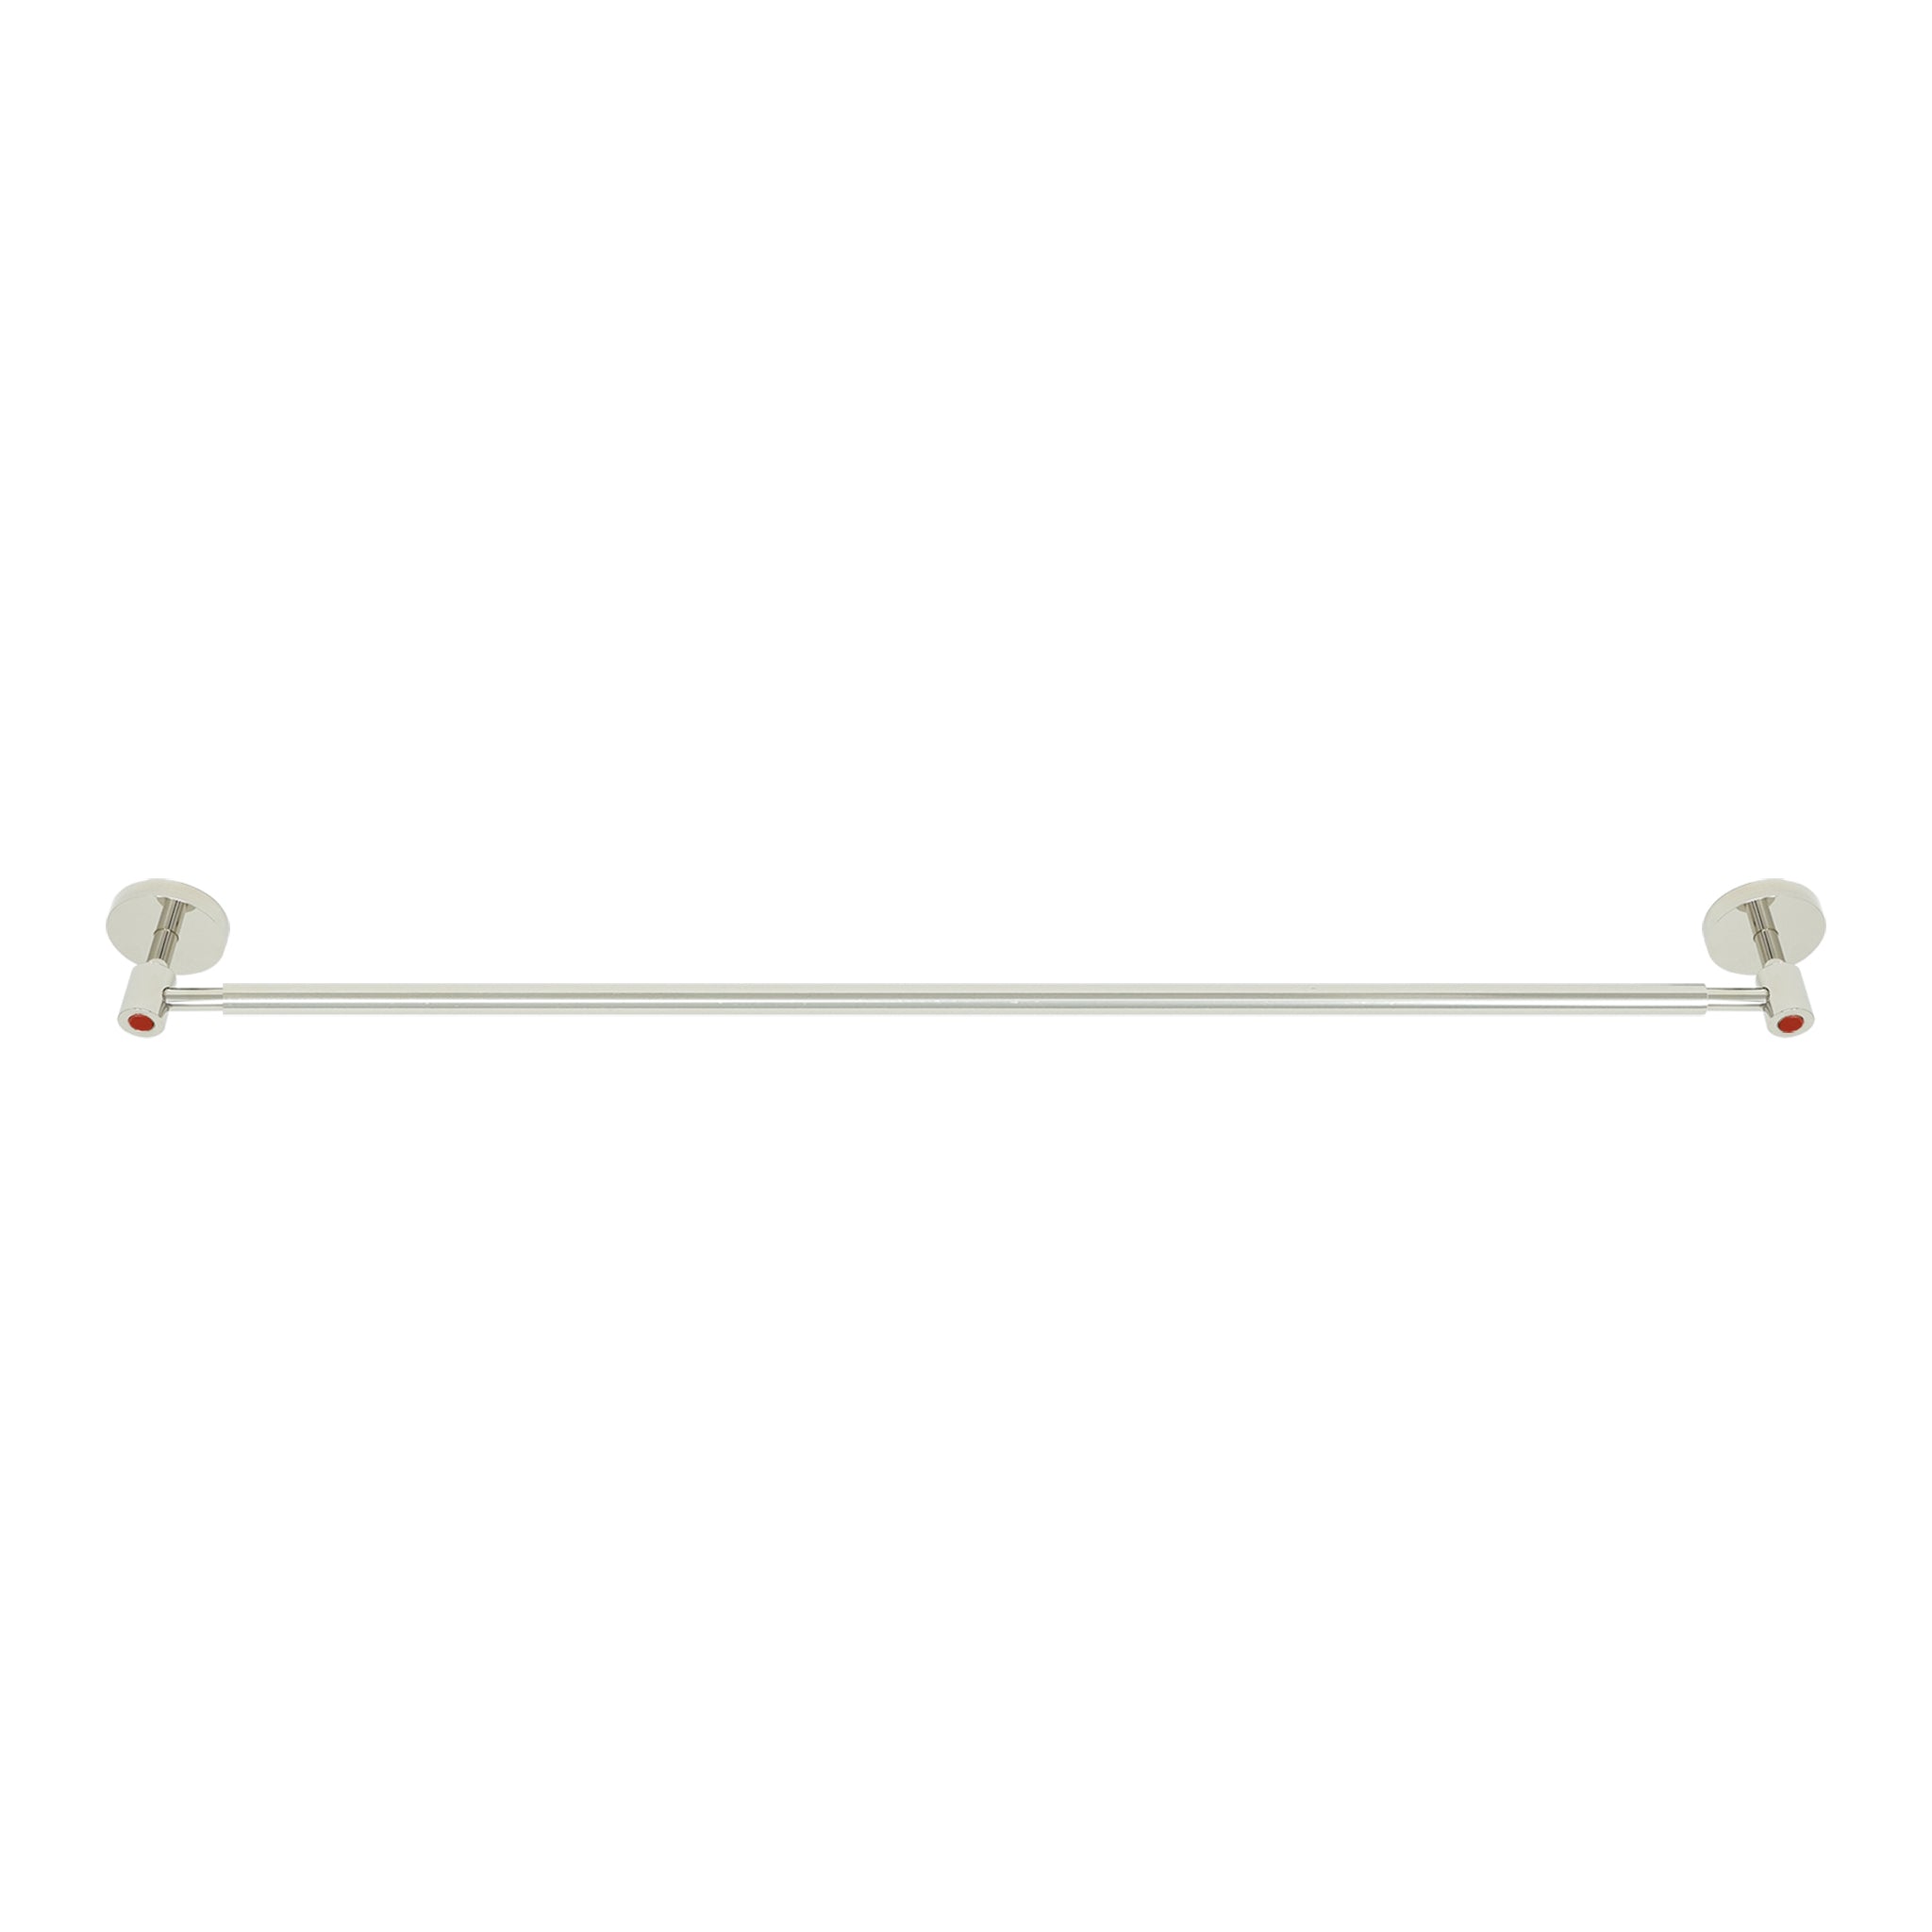 Nickel and red color Head towel bar 24" Dutton Brown hardware